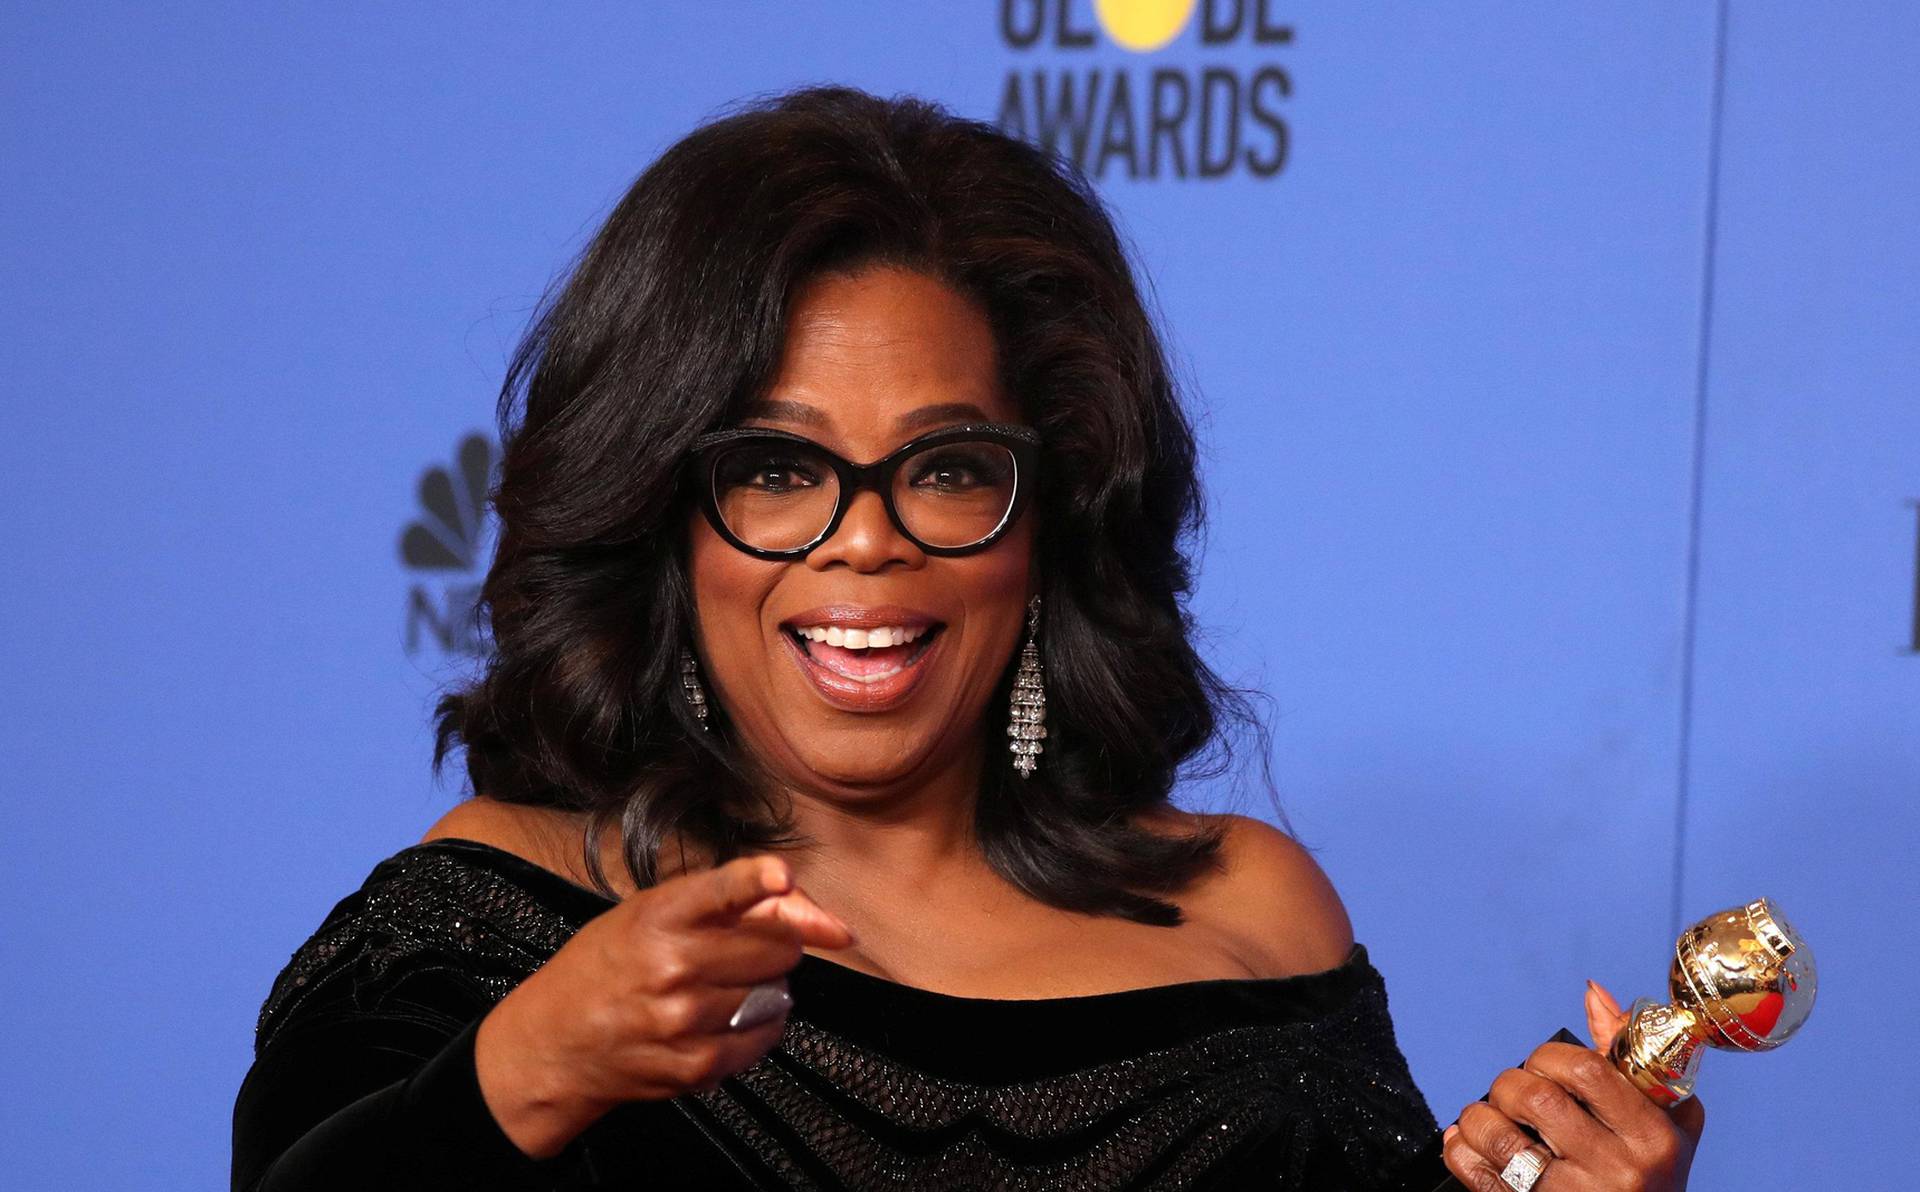 FILE PHOTO: Oprah Winfrey with her Cecil B. DeMille Award at the 75th Golden Globe Awards in Beverly Hills